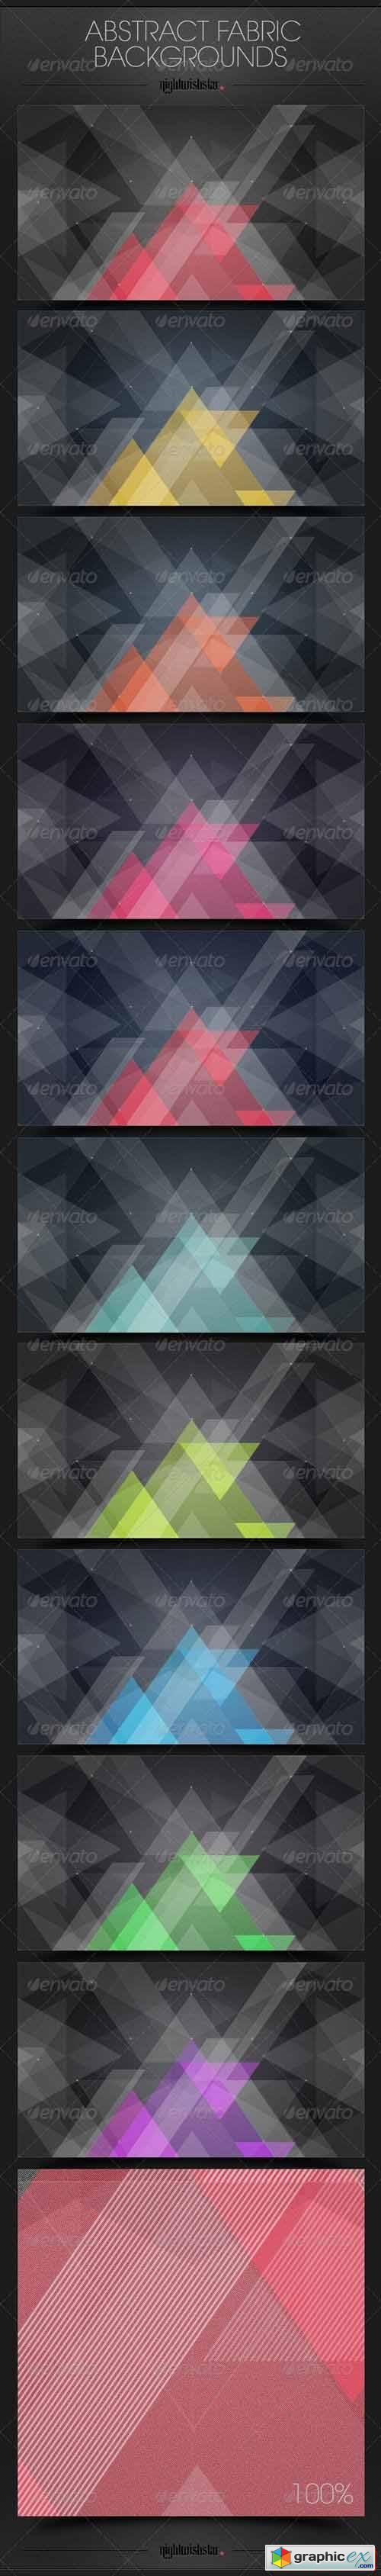 Abstract Fabric Triangles Backgrounds